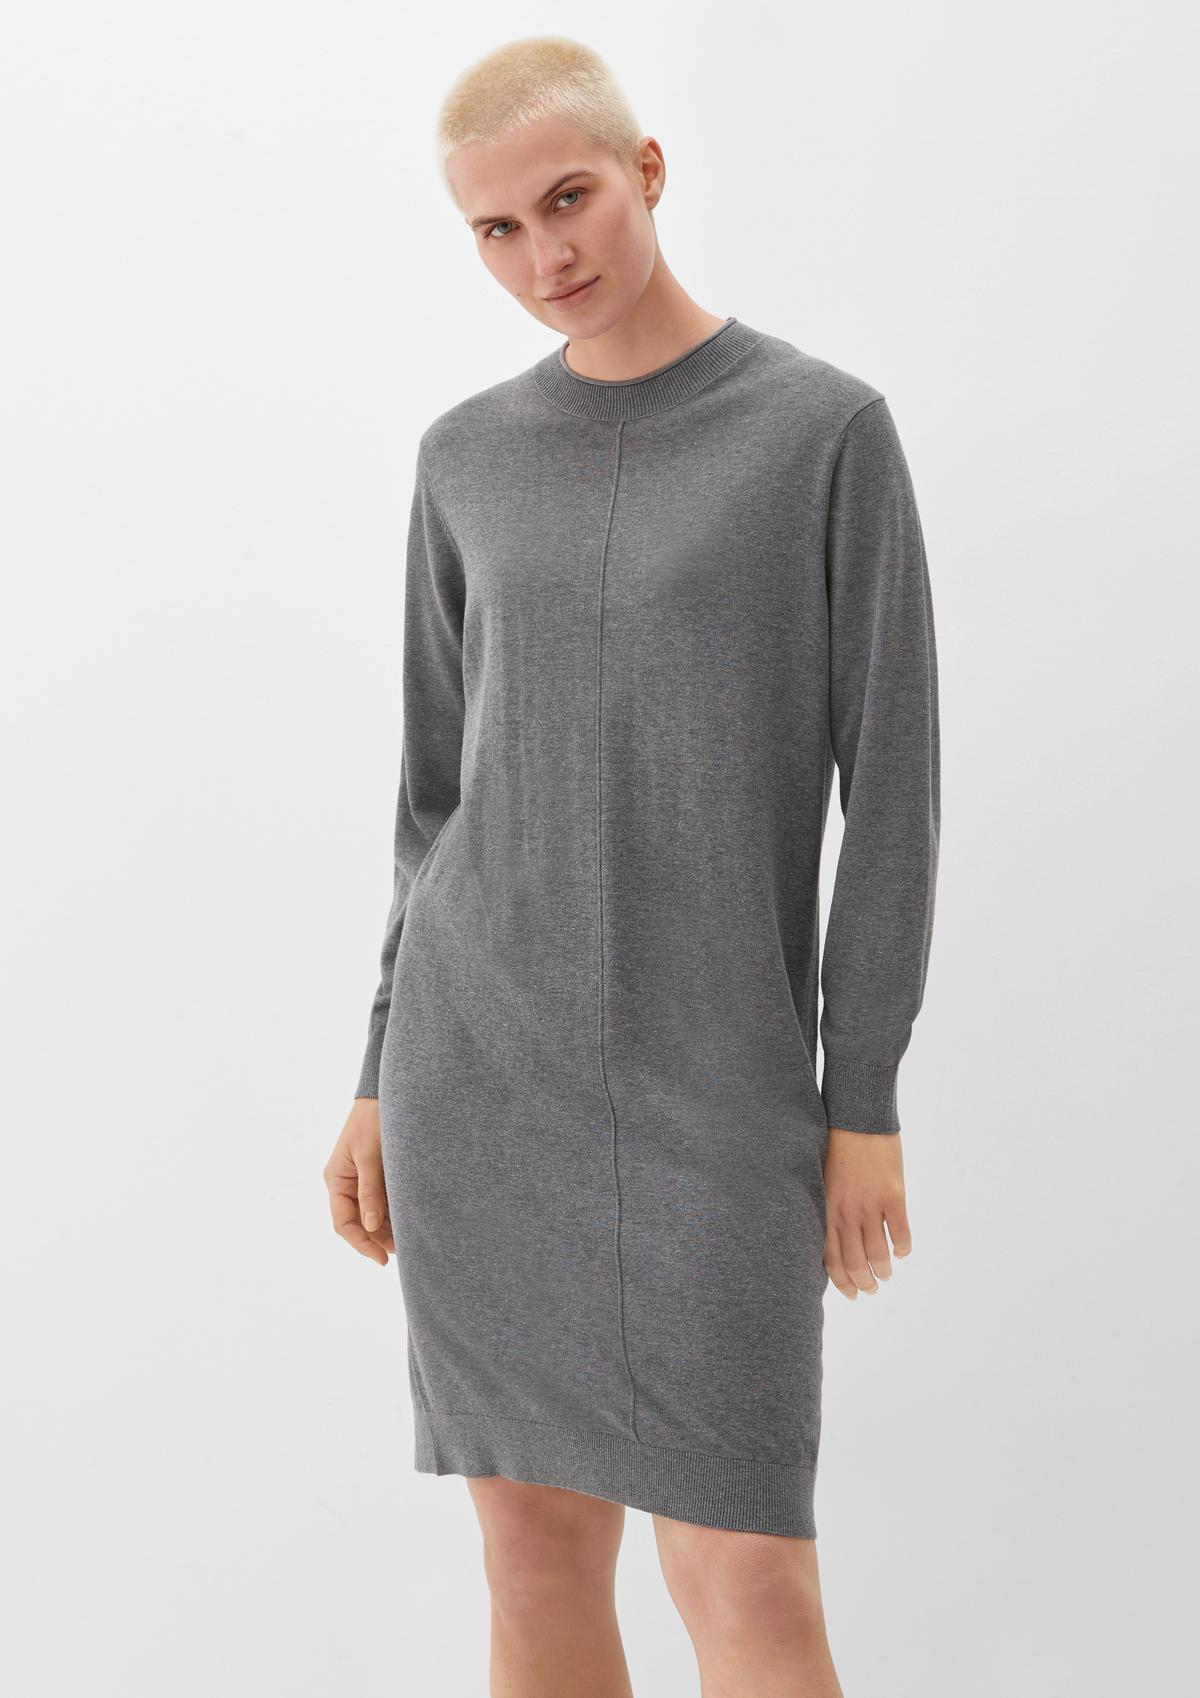 Knitted dress with a round neckline